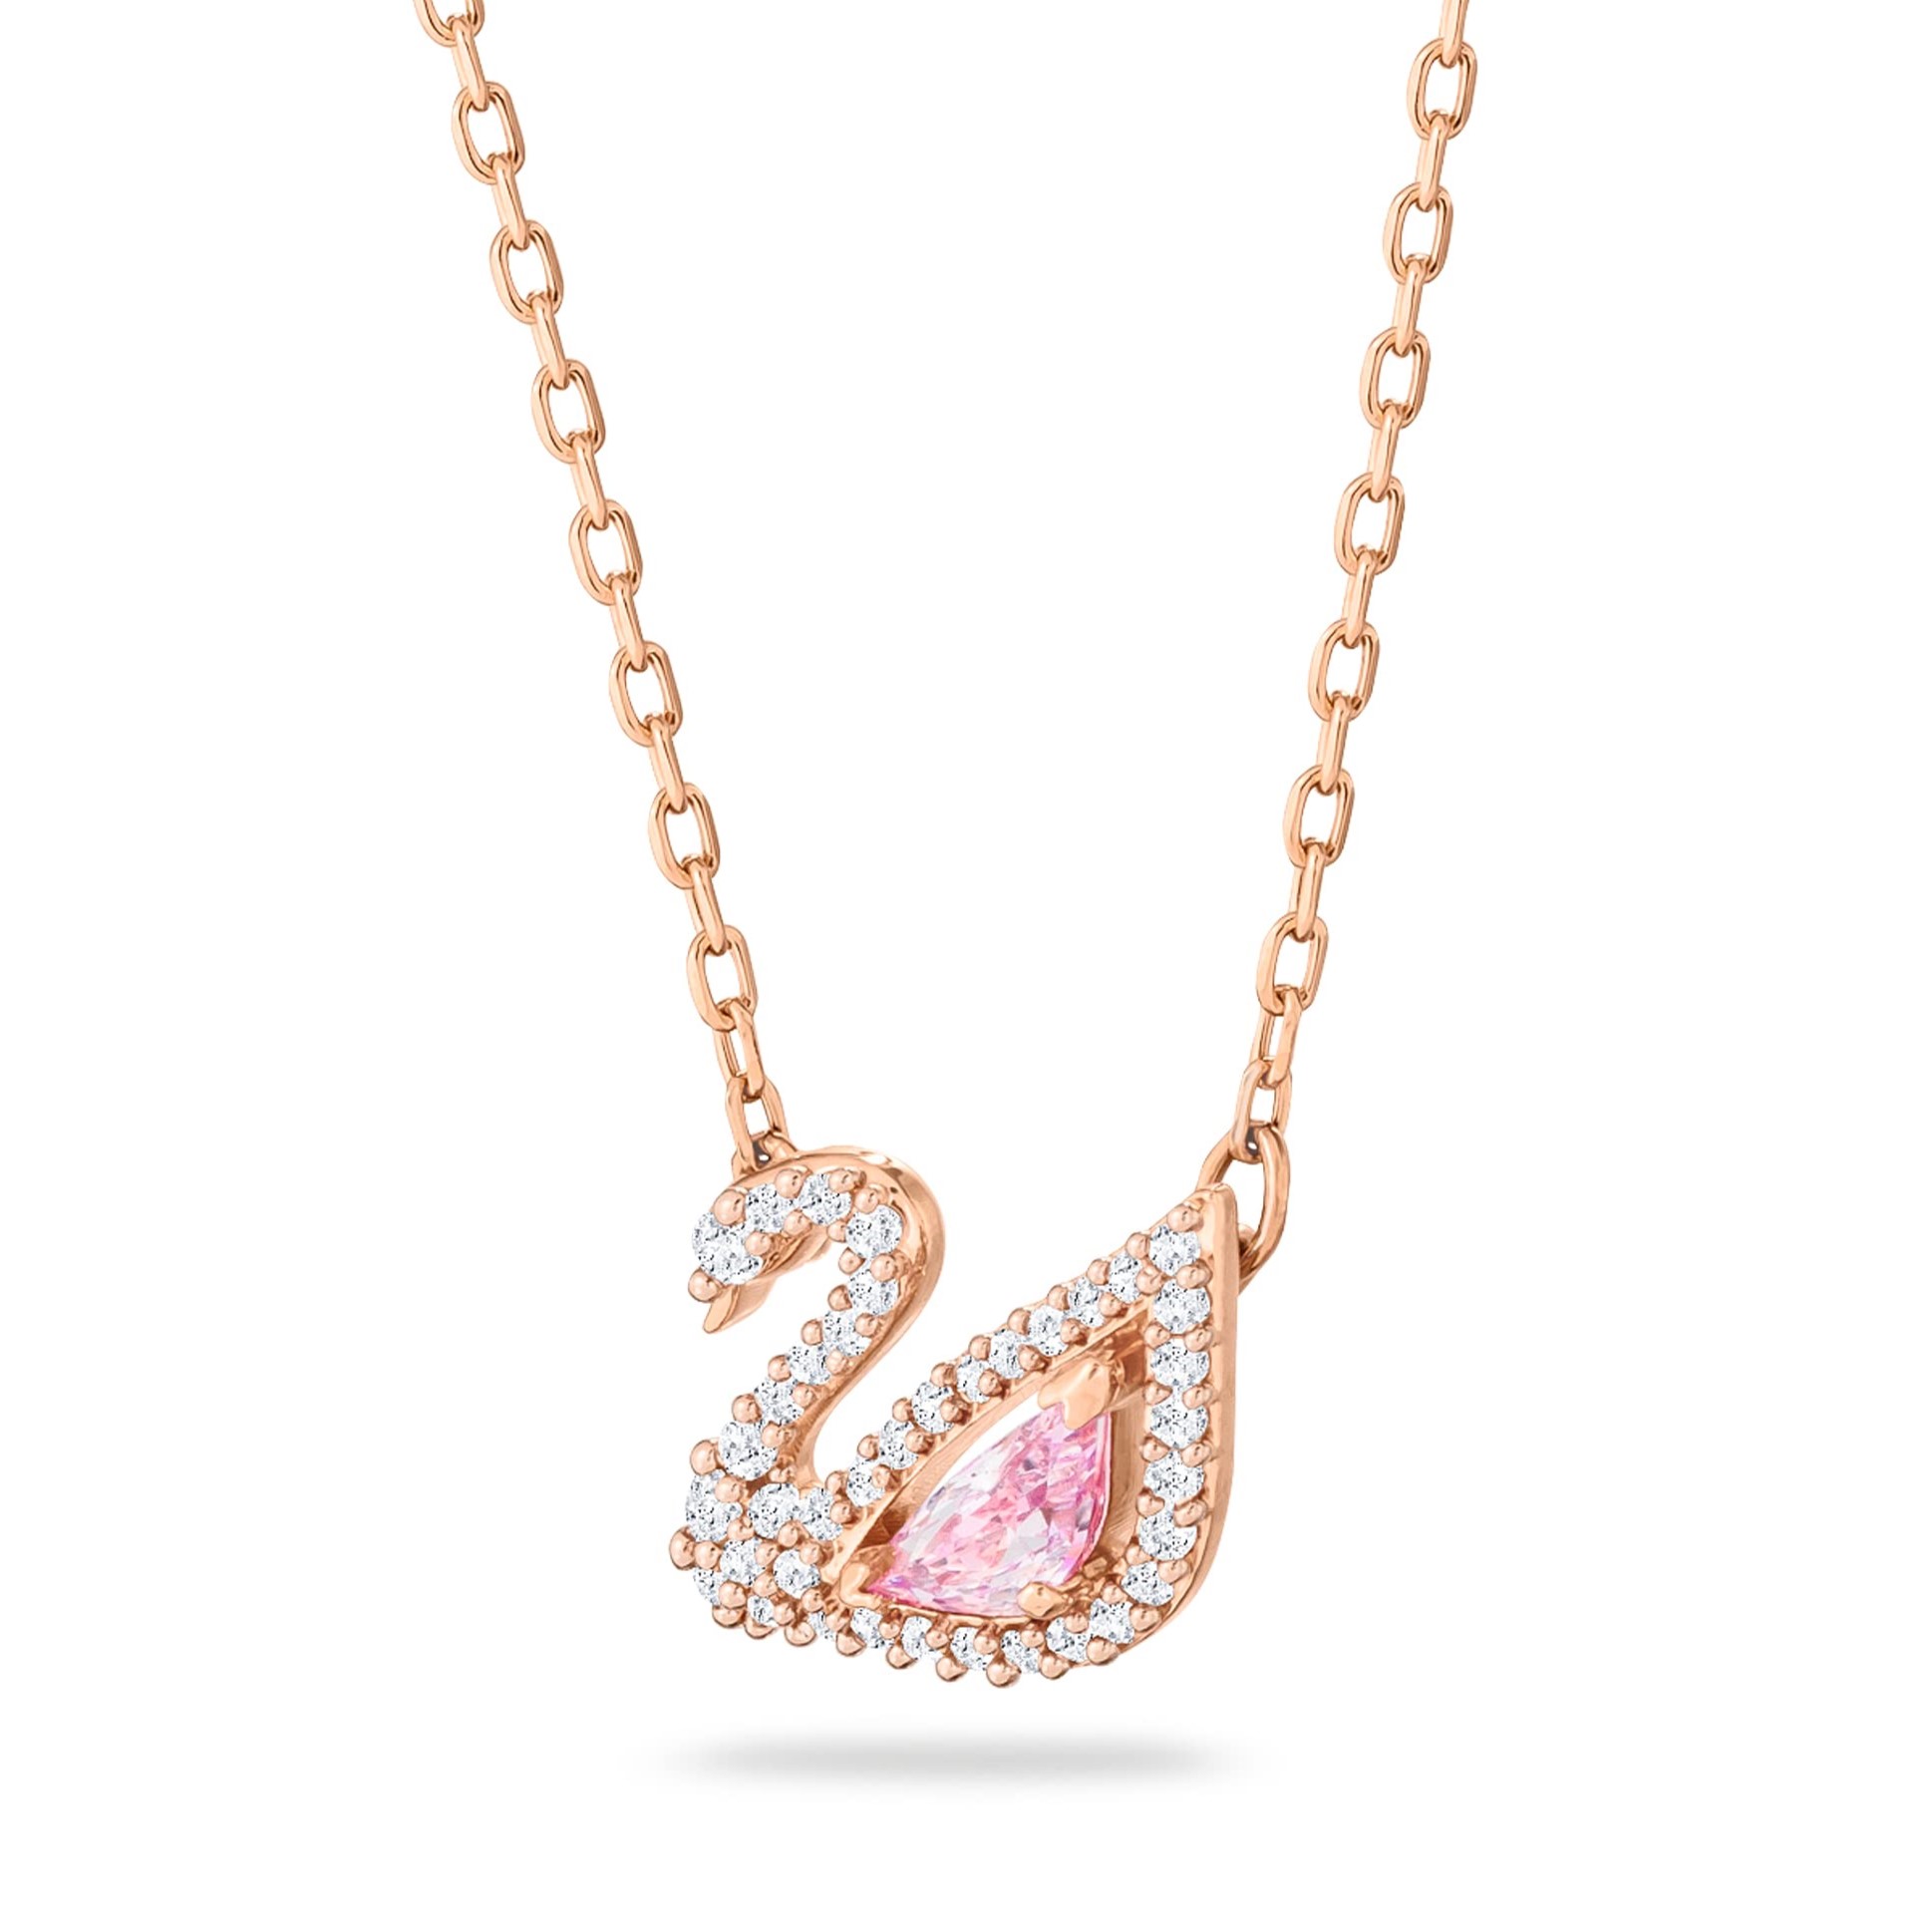 SET DÂY CHUYỀN VÒNG ĐEO TAY SWAROVSKI DAZZLING SWAN NECKLACE MULTI-COLORED ROSE-GOLD TONE PLATED 5469989 4